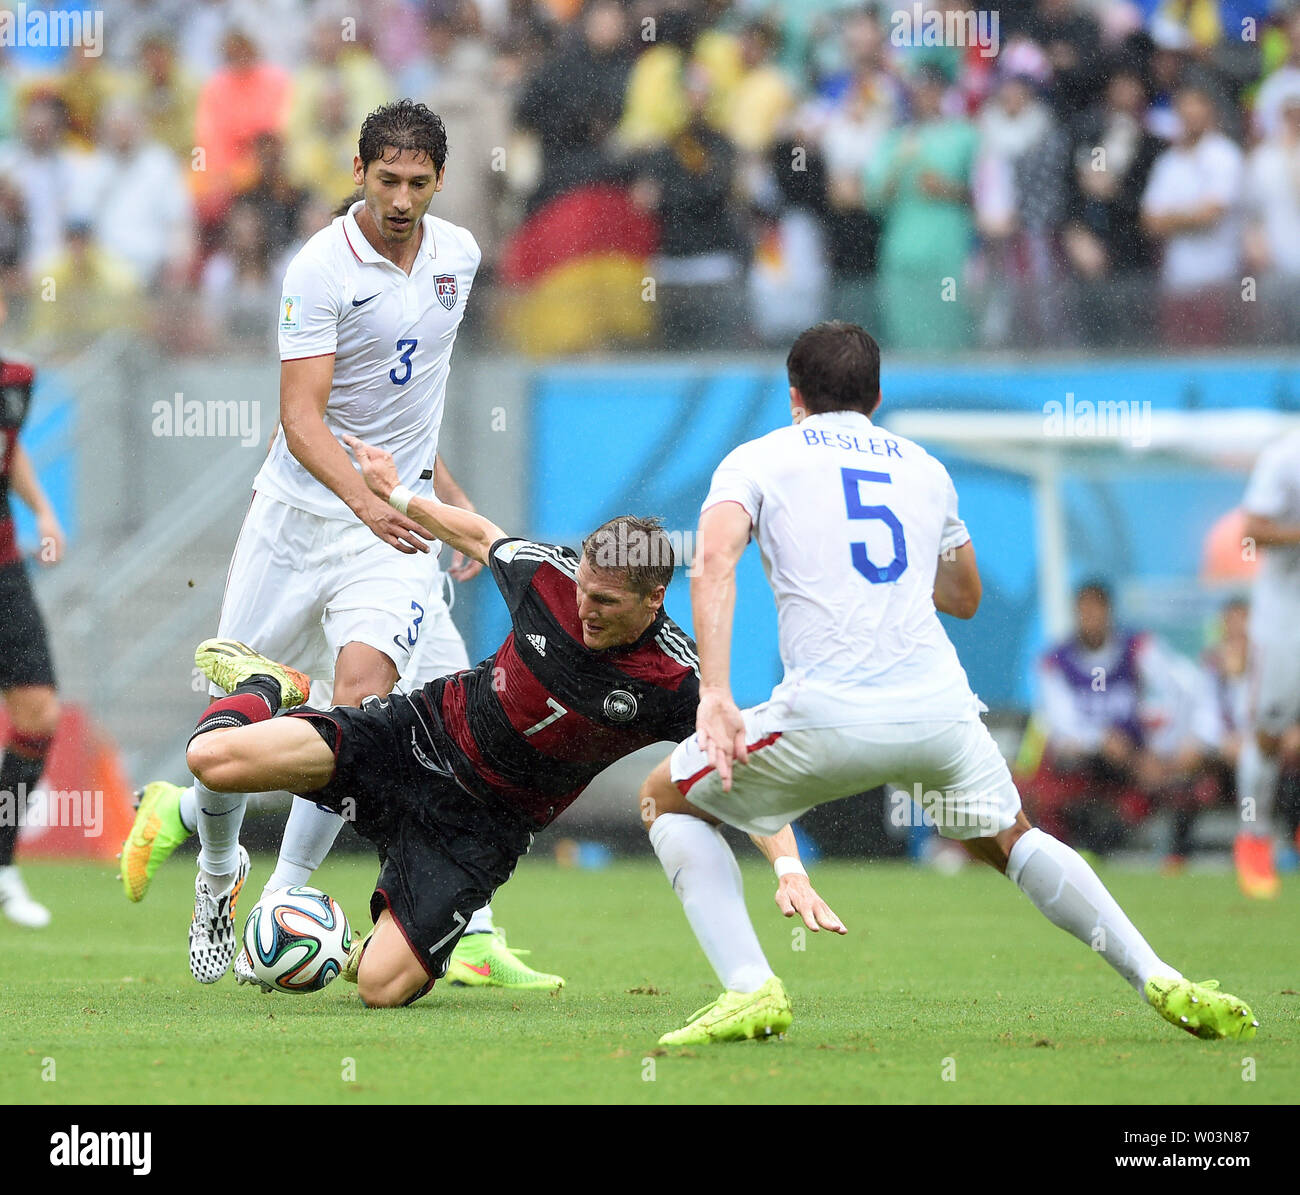 Omar Gonzalez (L) of USA competes with Bastian Schweinsteiger of Germany during the 2014 FIFA World Cup Group G match at the Arena Pernambuco in Recife, Brazil on June 26, 2014. UPI/Chris Brunskill Stock Photo